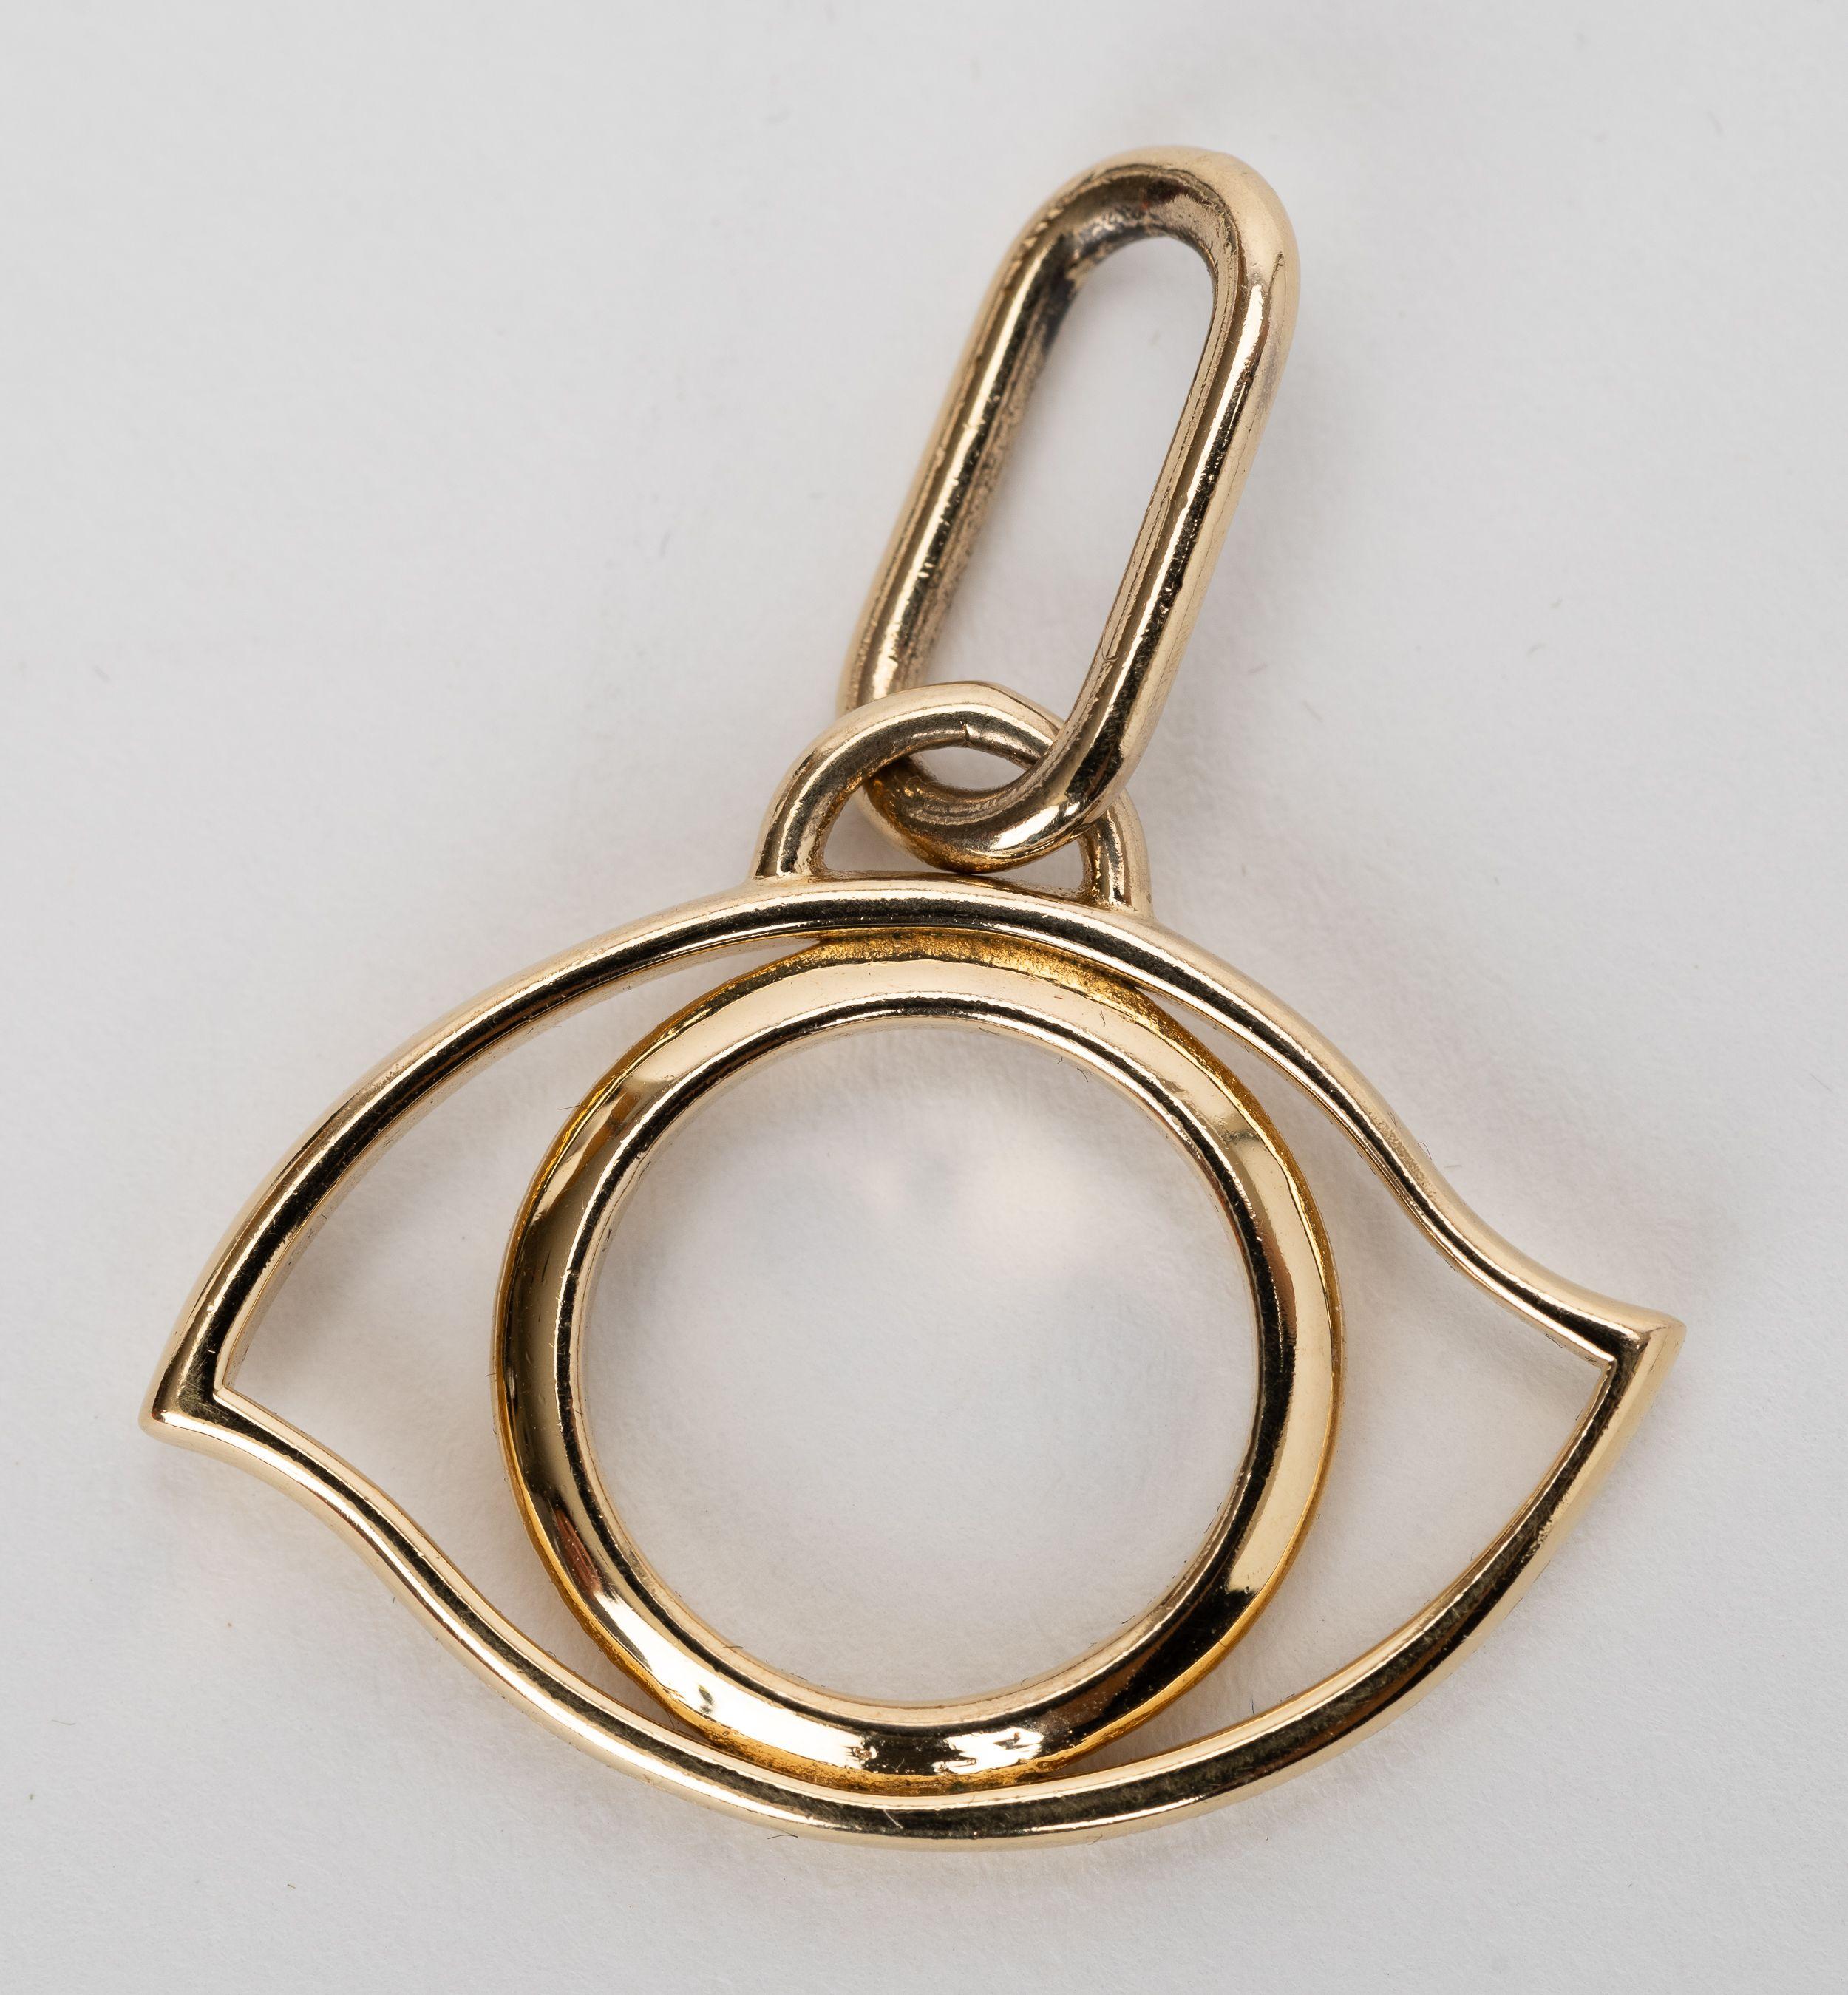 Hermes Gold Oeil Curiosite Eye Charm In New Condition For Sale In West Hollywood, CA